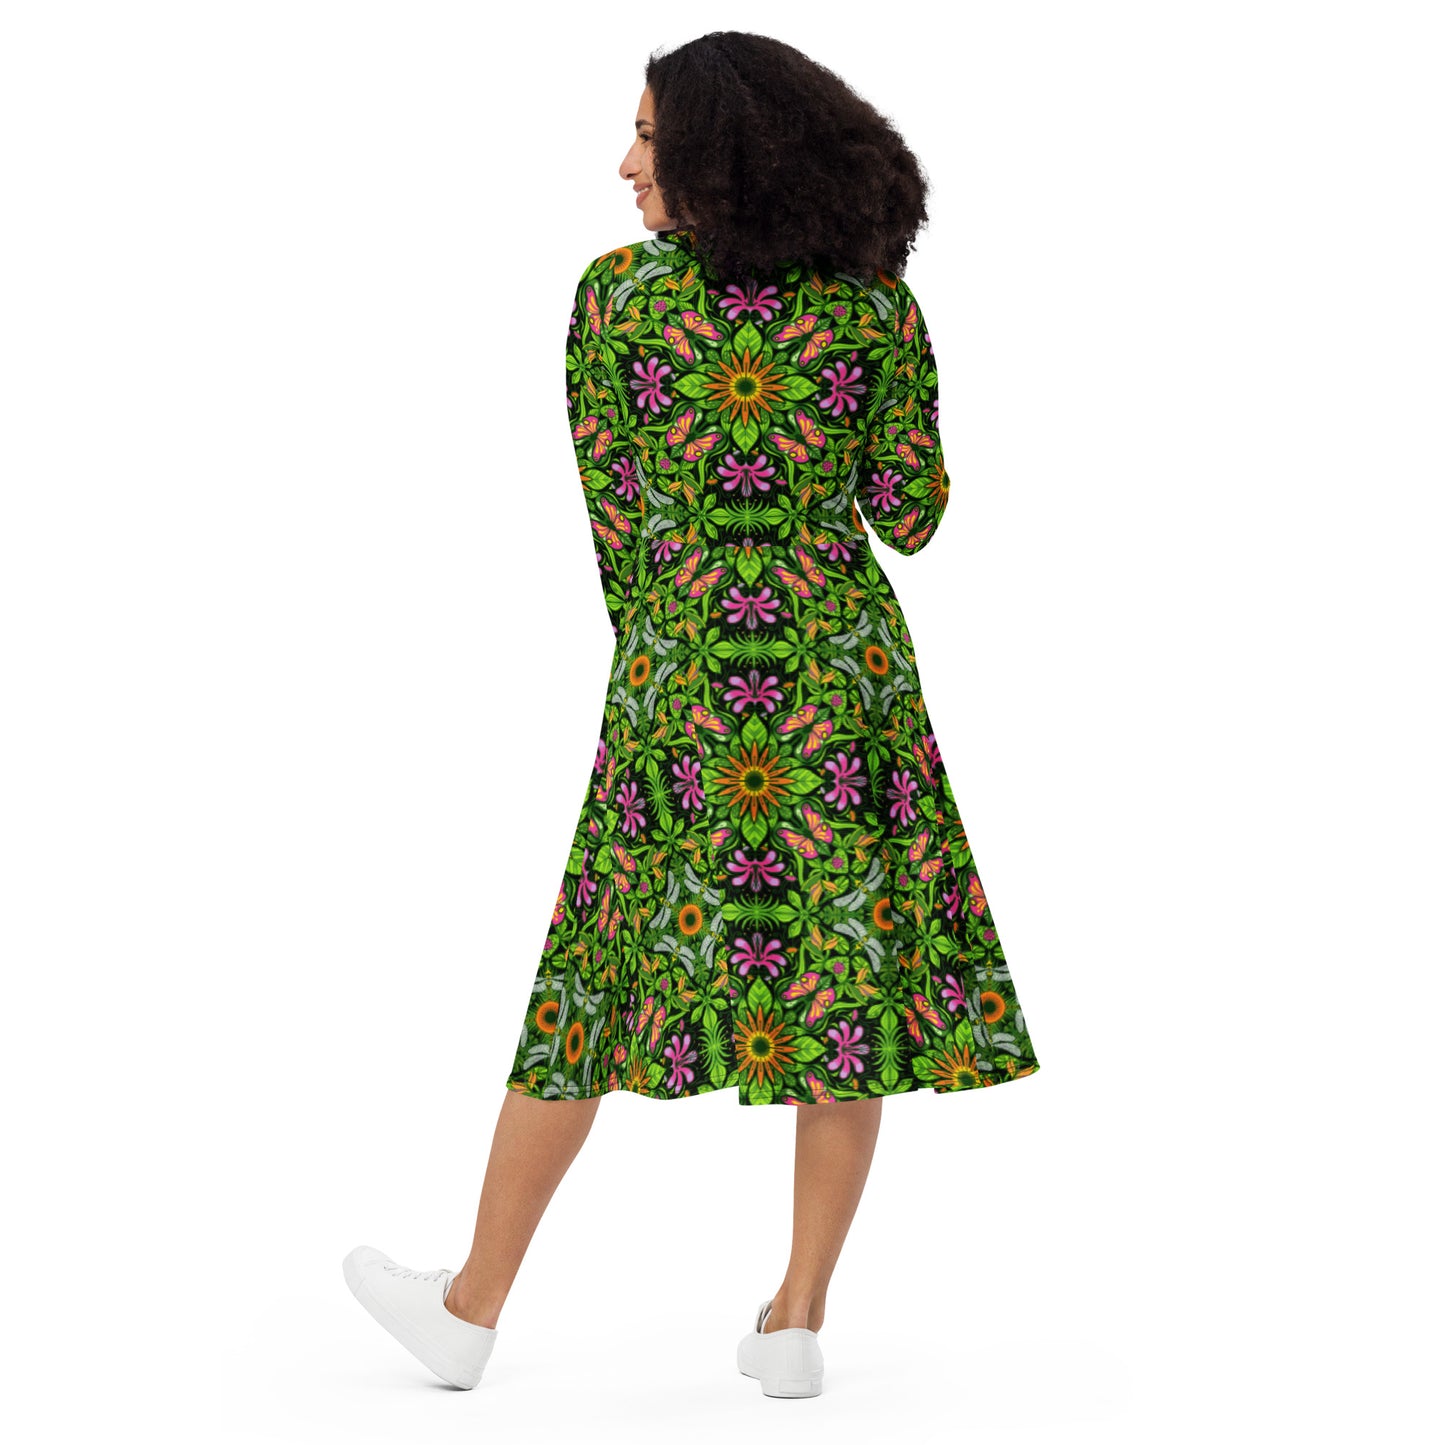 Magical garden full of flowers and insects All-over print long sleeve midi dress. Back view